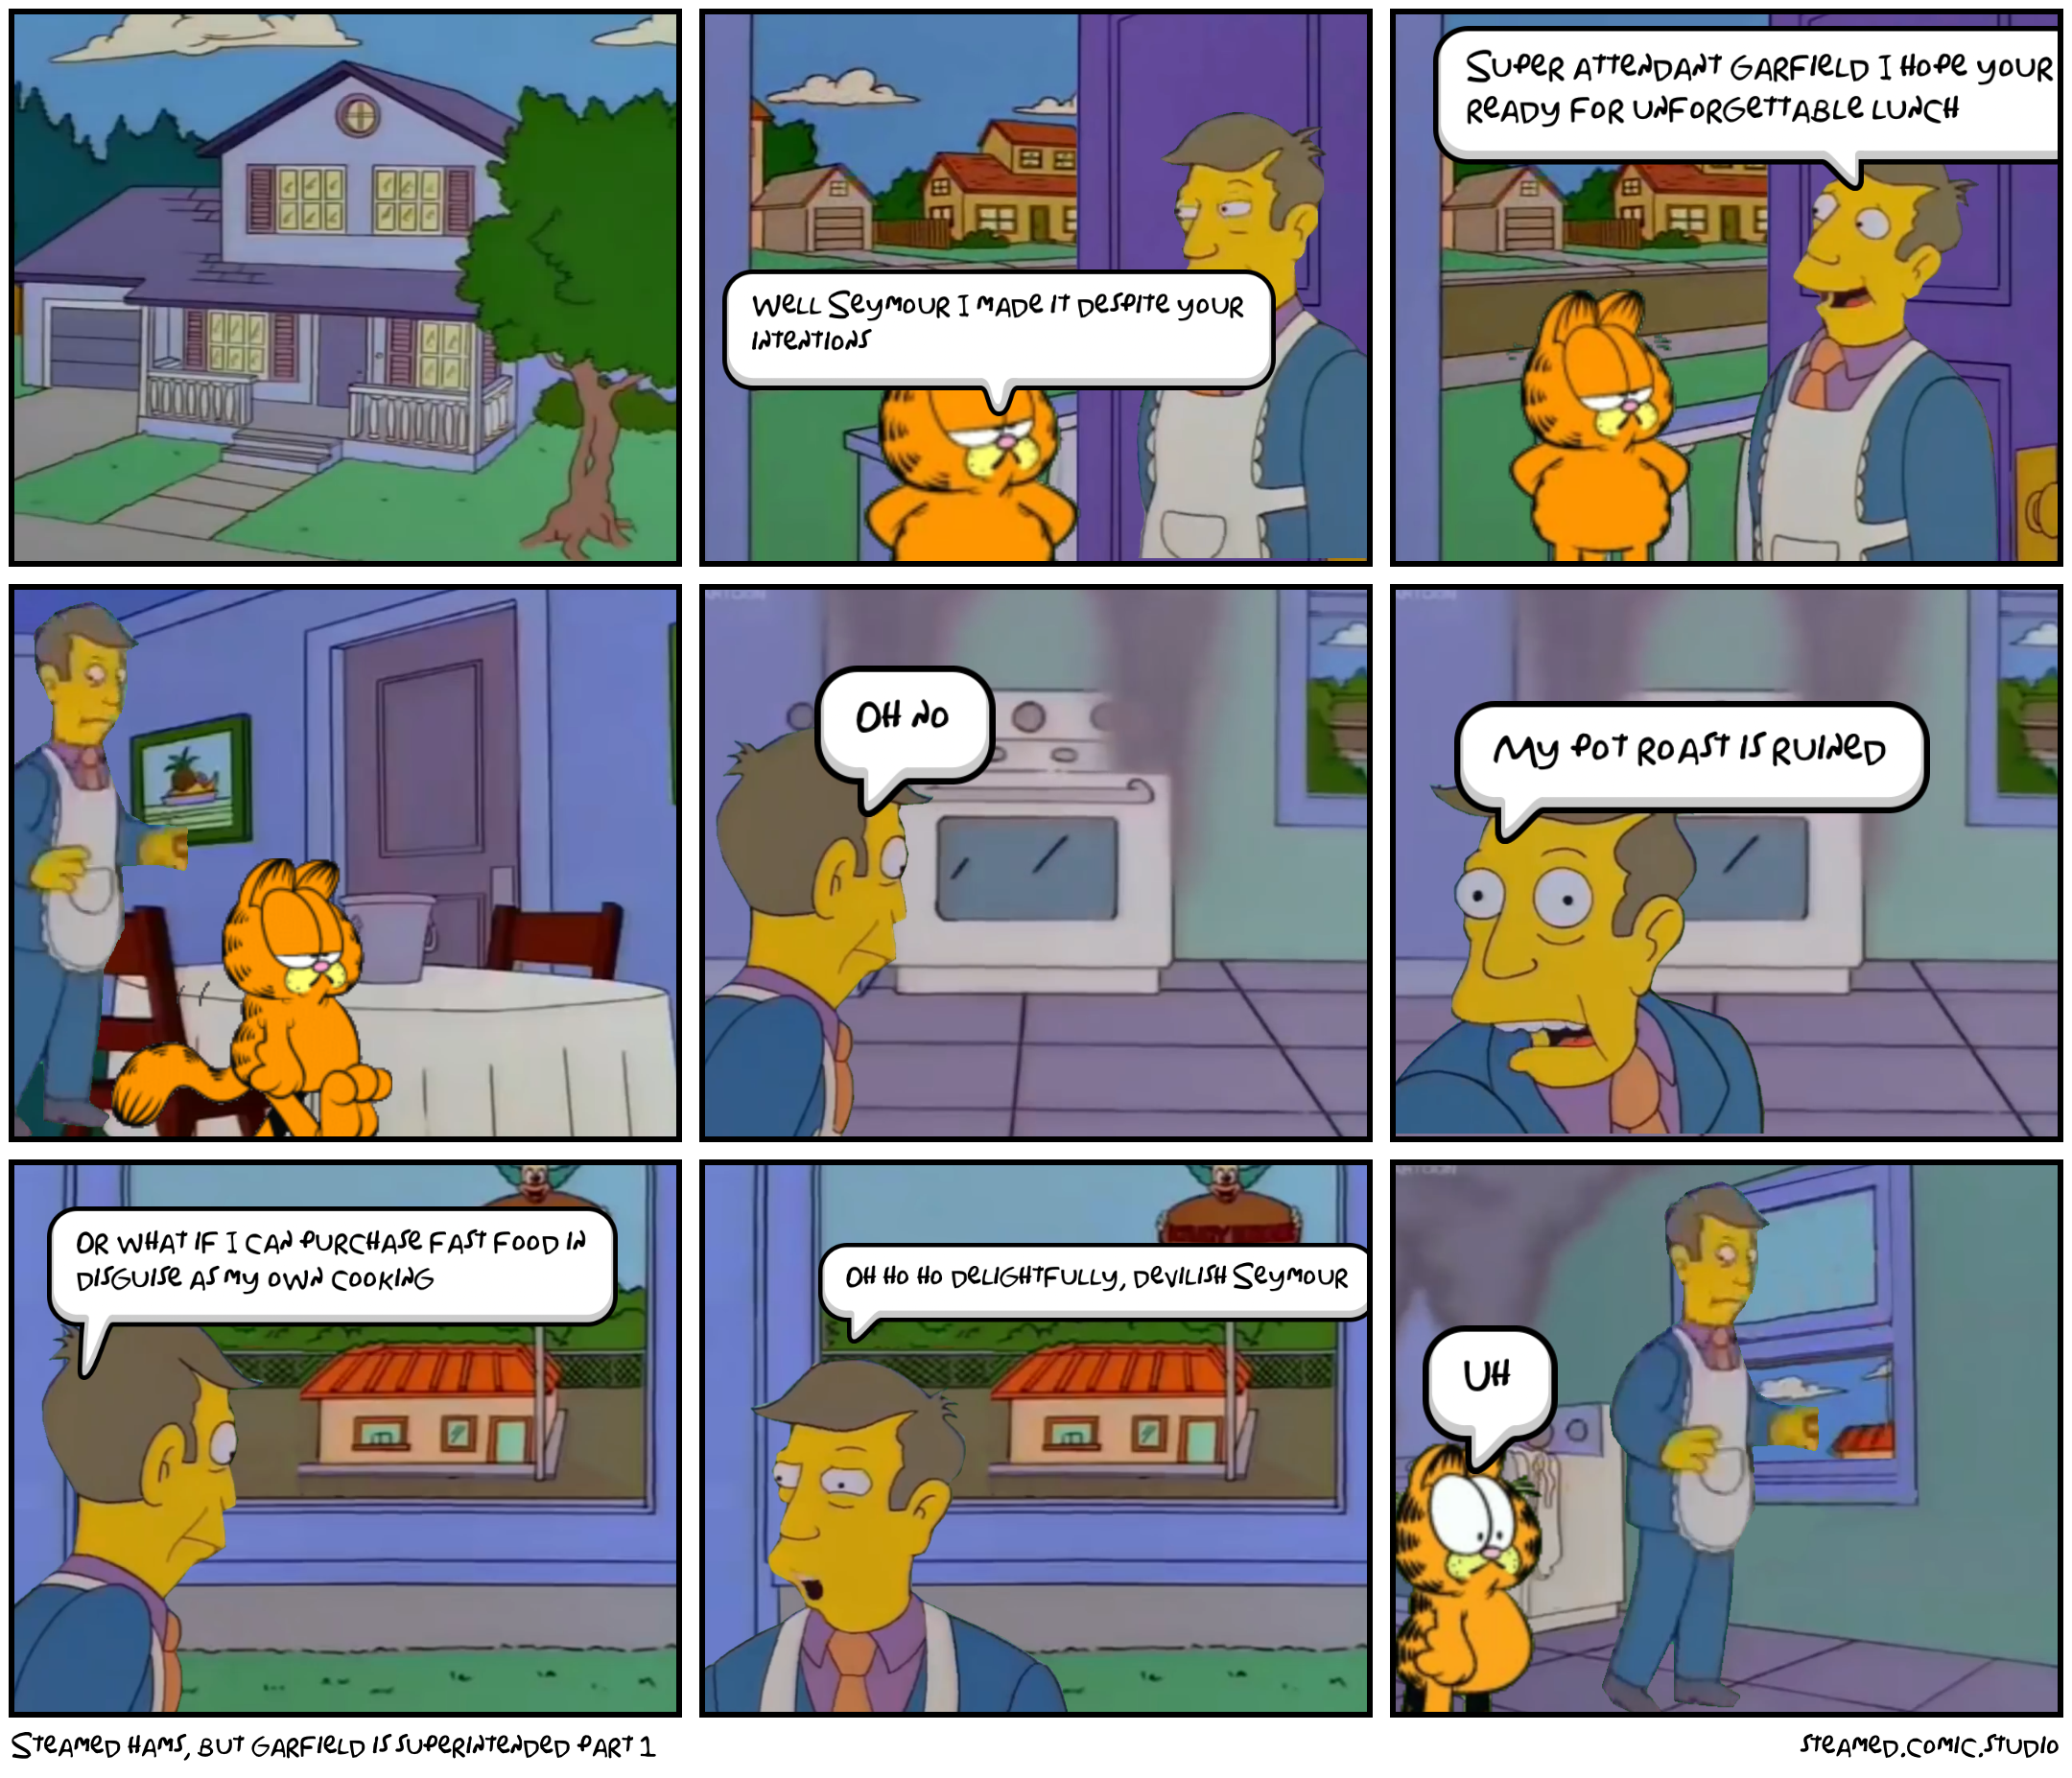 Steamed hams, but Garfield is superintended part 1